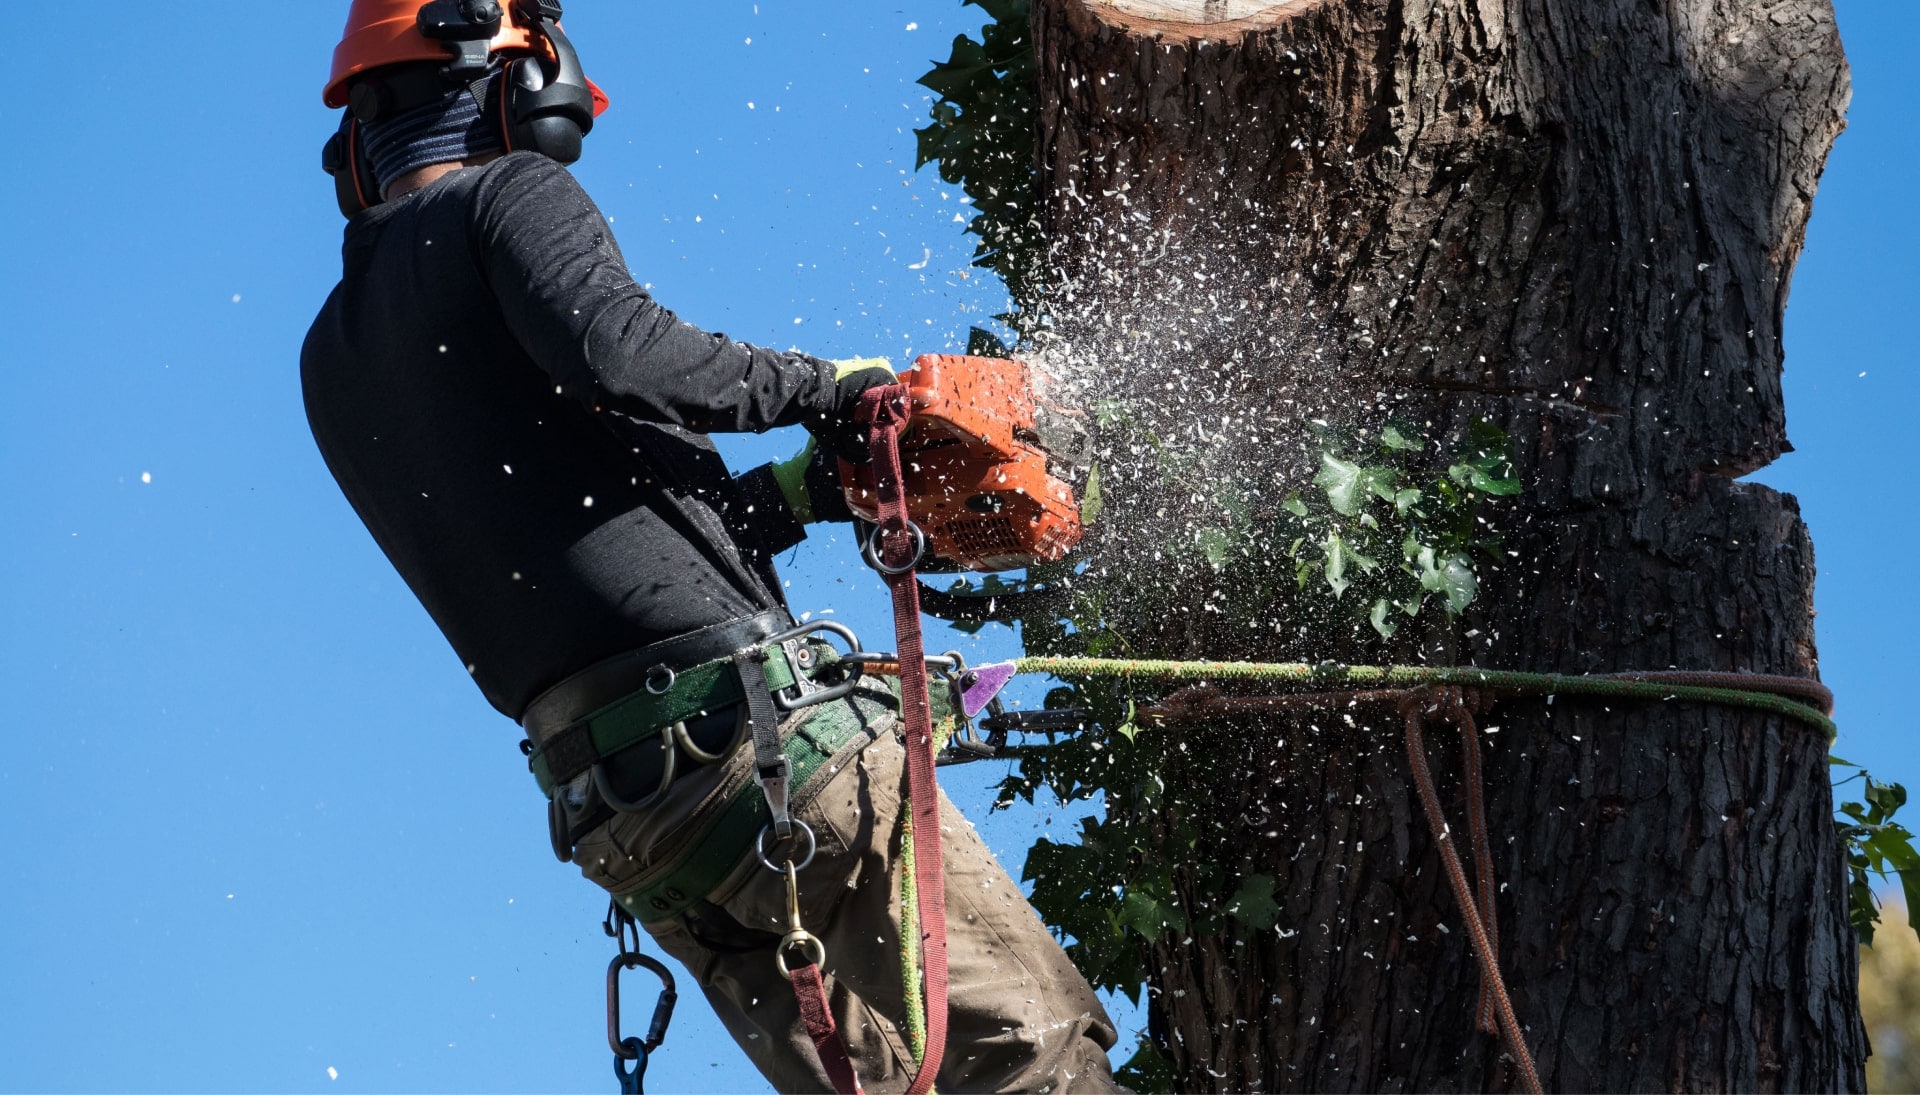 A tree removal solutions expert in Los Angeles, California using orange power saw